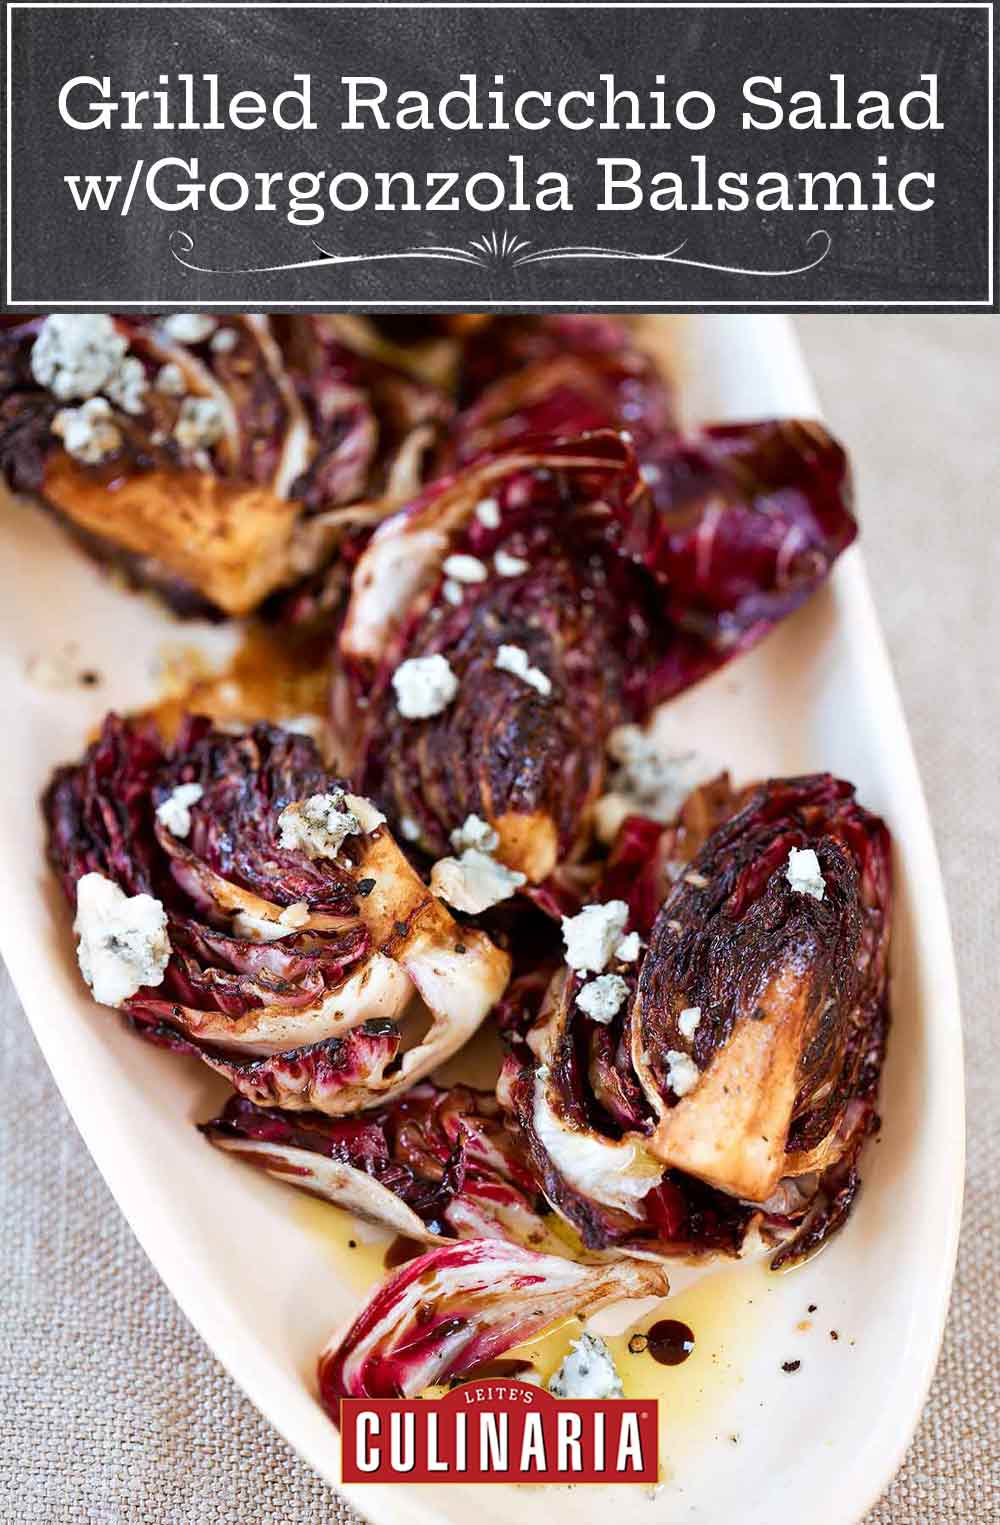 Oval plate with a grilled radicchio salad, Gorgonzola, and balsamic vinaigrette